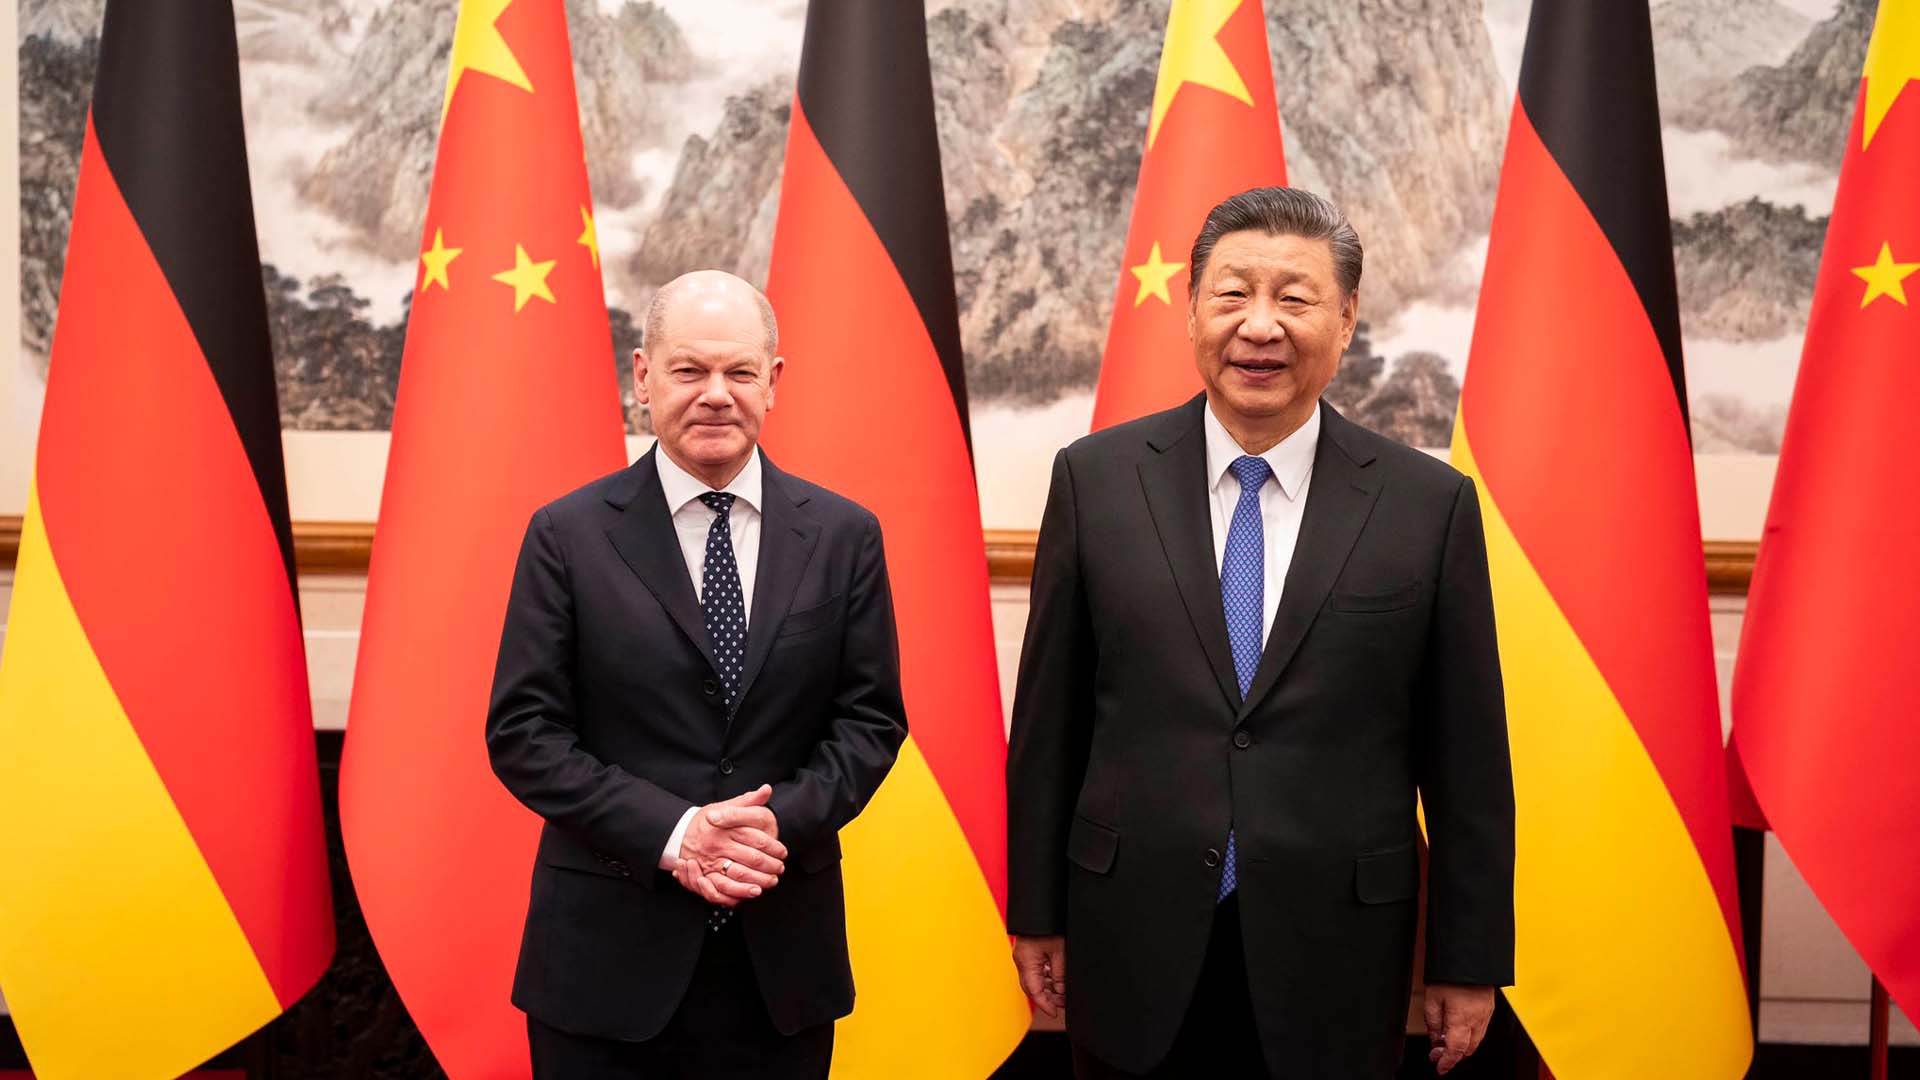 Chancellor Scholz’s Visit to China: Strengthening Economic Ties or Dissatisfying Allies?